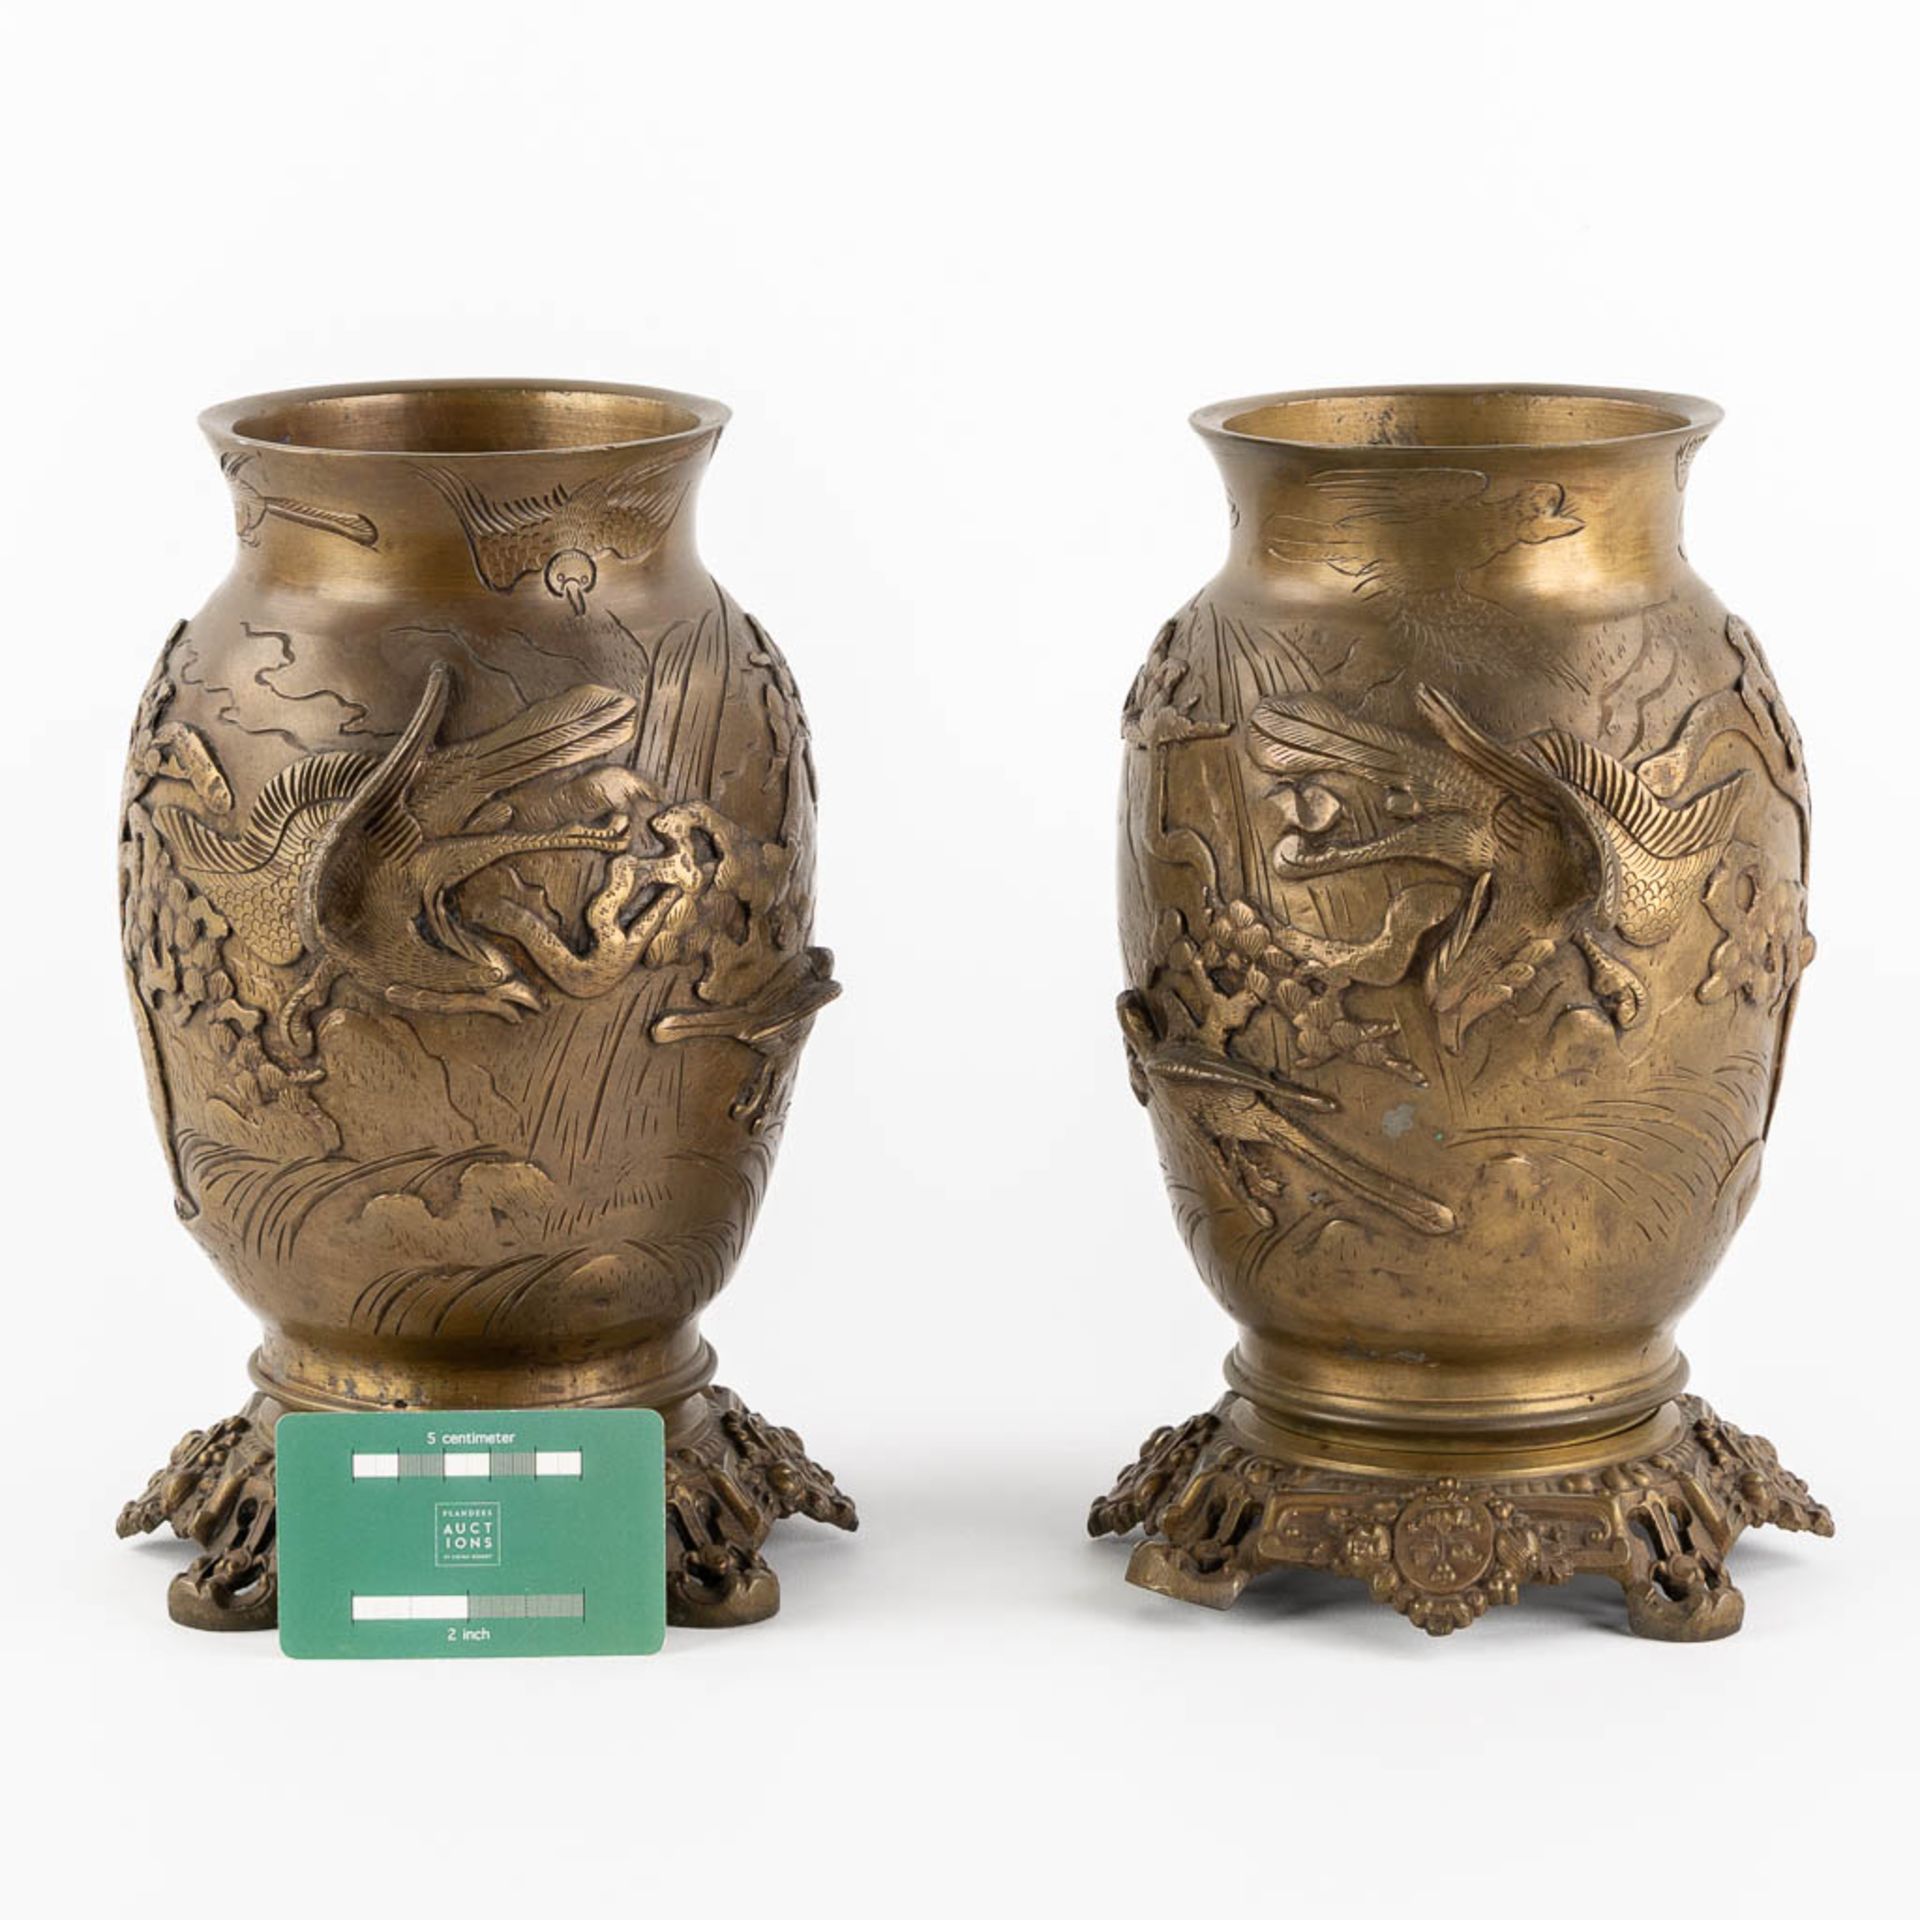 A pair of Oriental vases, depicting flying birds and trees. Patinated bronze. (H:27 x D:16 cm) - Image 2 of 16